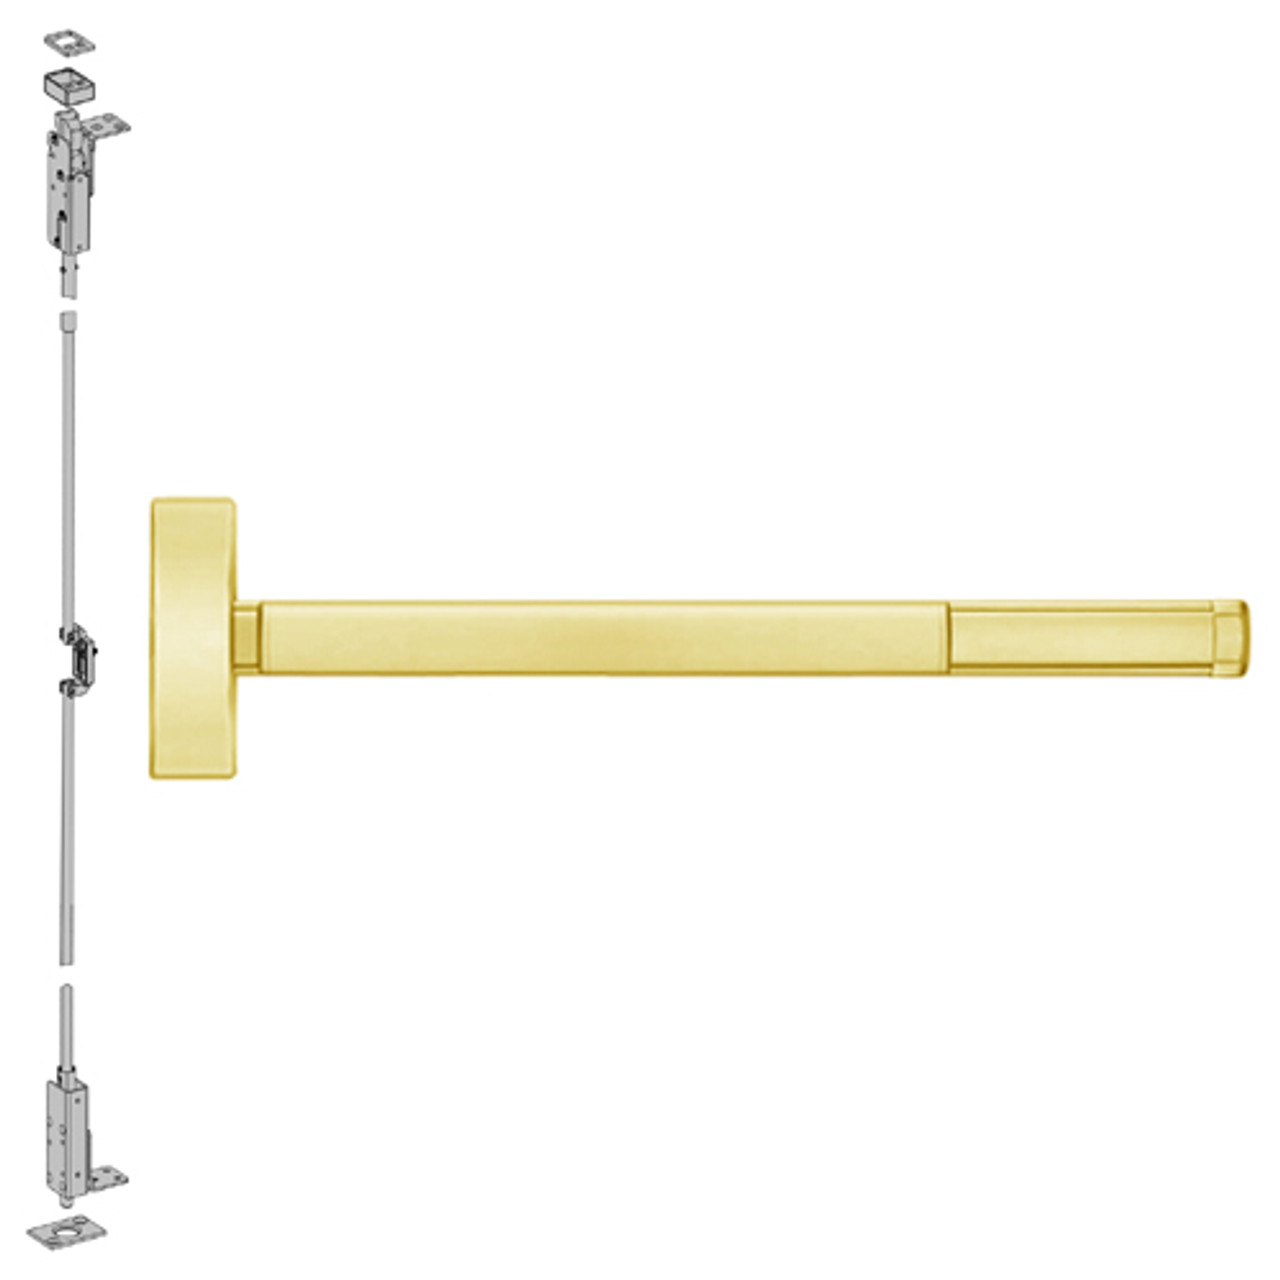 MLRFL2715-605-48 PHI 2700 Series Wood Door Concealed Vertical Exit Device with Motorized Latch Retraction Prepped for Thumbpiece Always Active in Bright Brass Finish